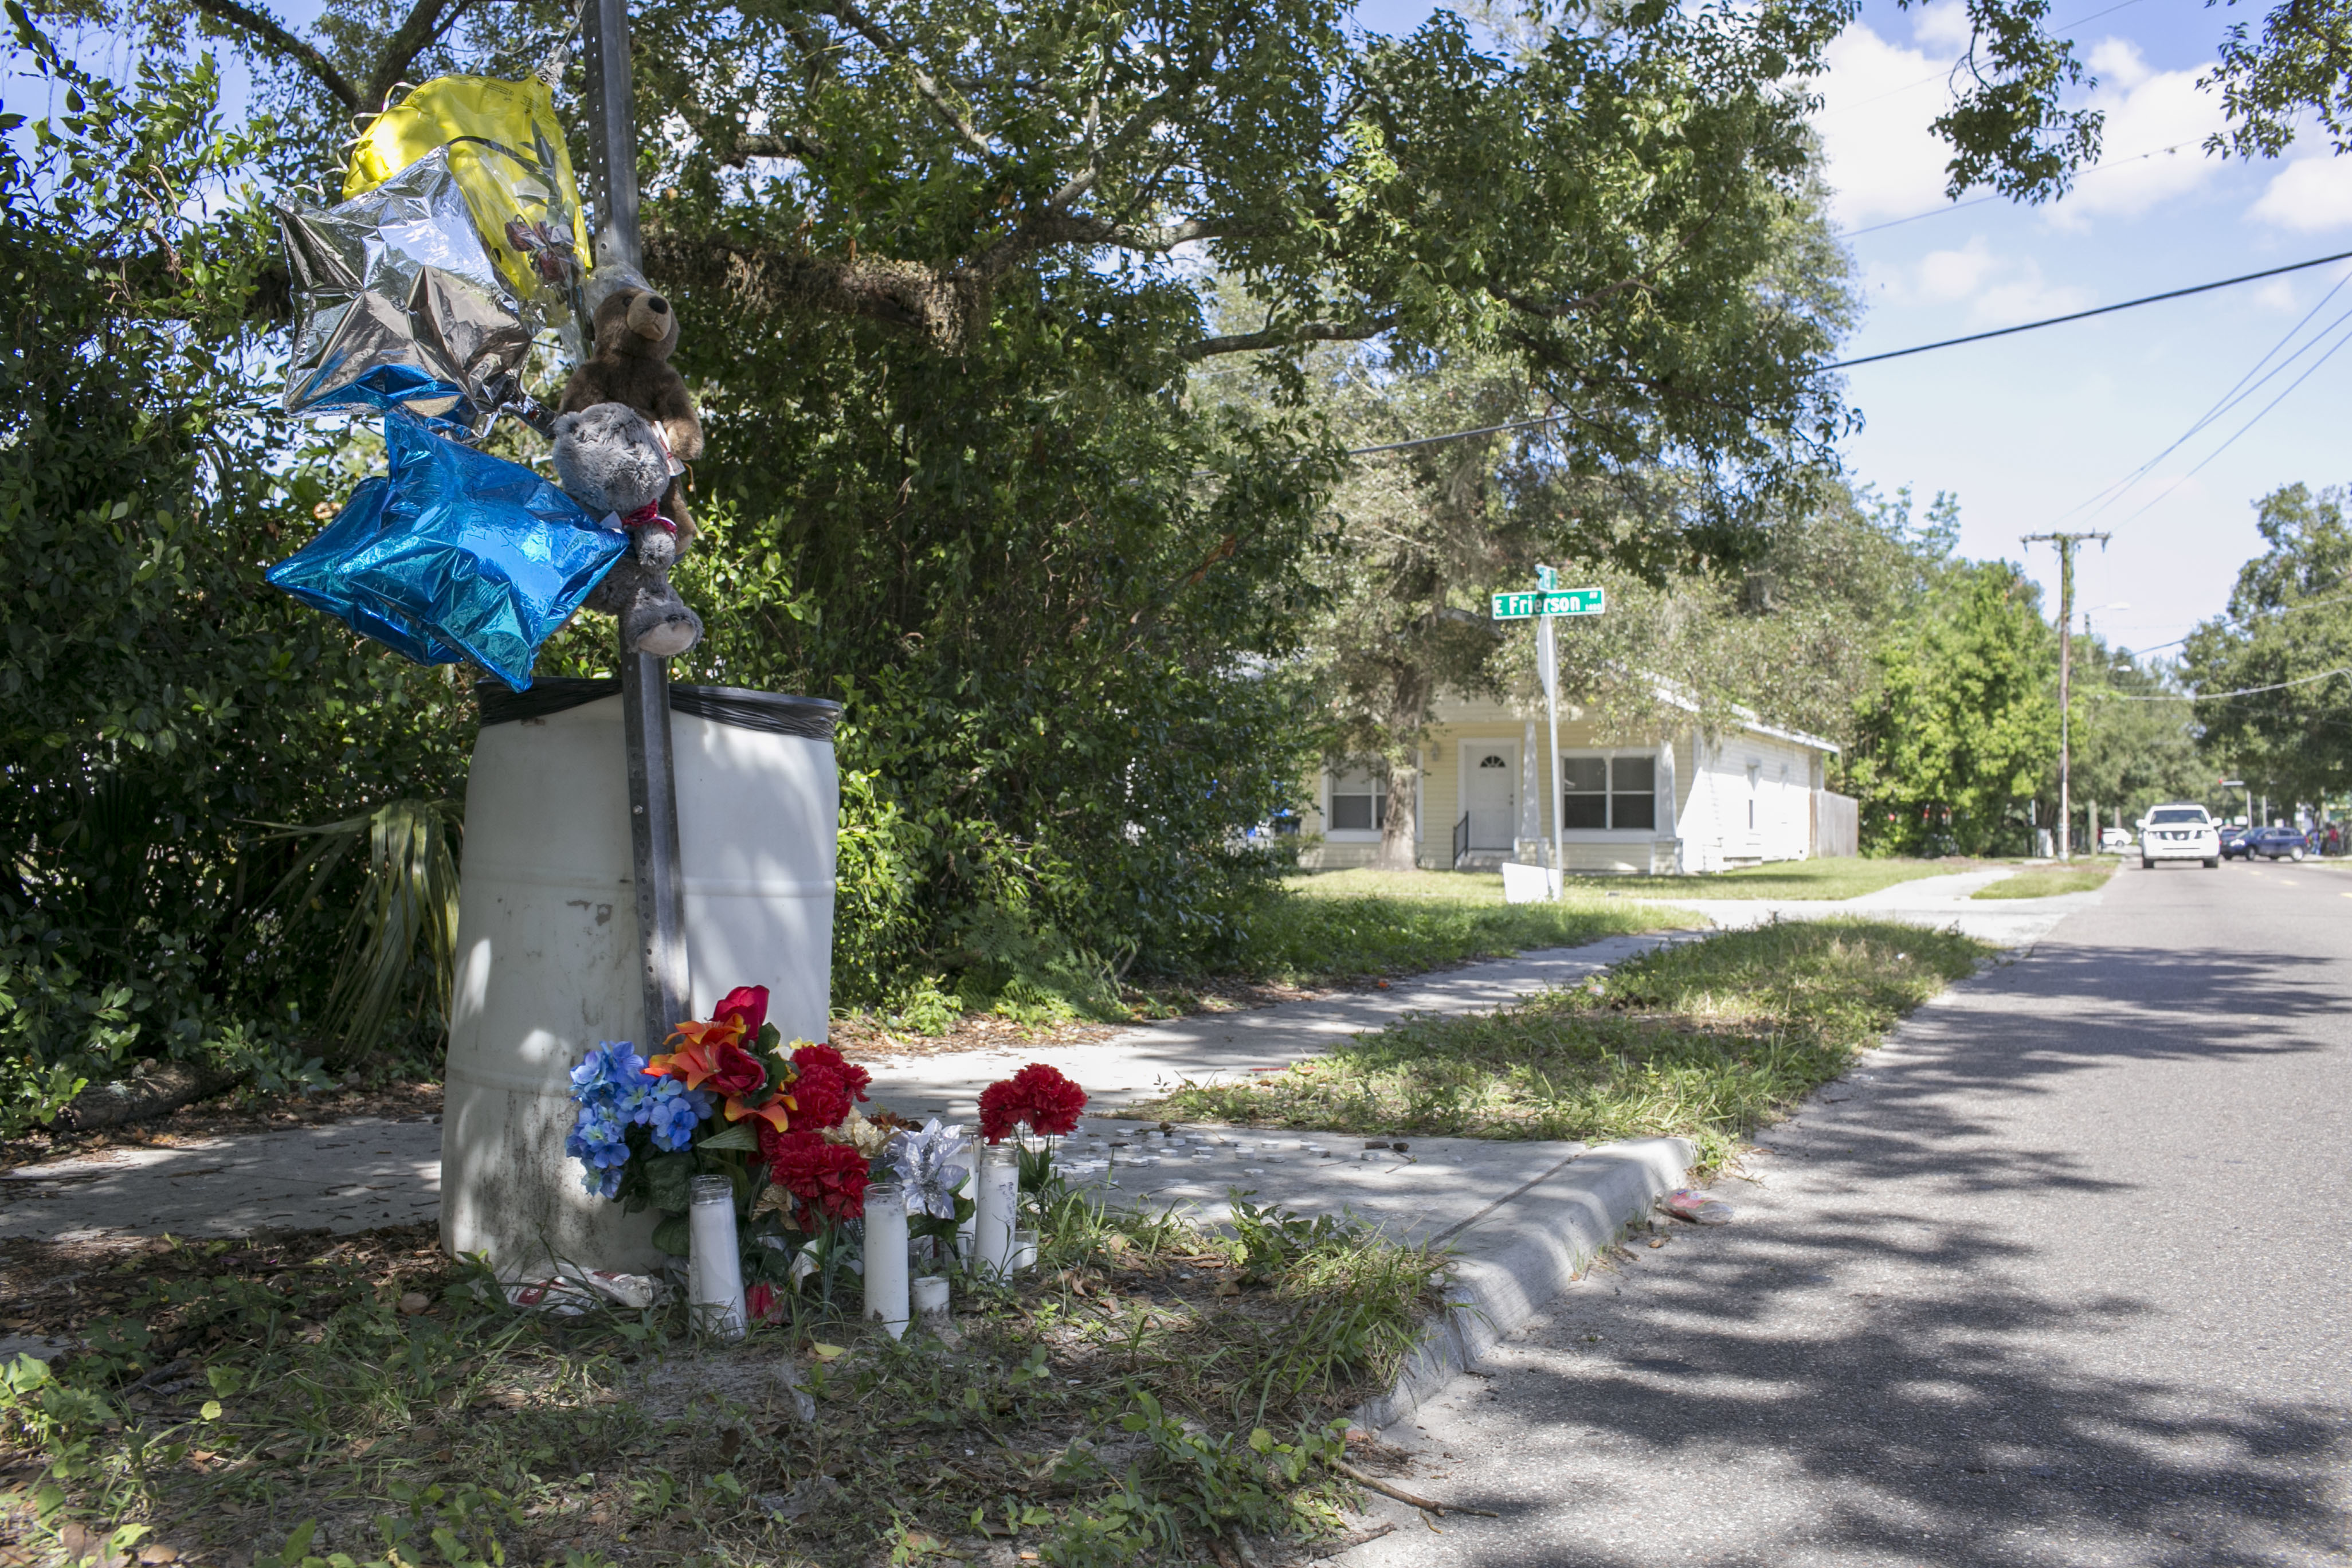 A memorial for Benjamin Mitchell, who was killed on Oct. 9, 2017 in the Seminole Heights neighborhood in Tampa, the first of four recent killings suspected to be tied to a serial killer (Gabriella Angotti-Jones—The Tampa Bay Times/AP)